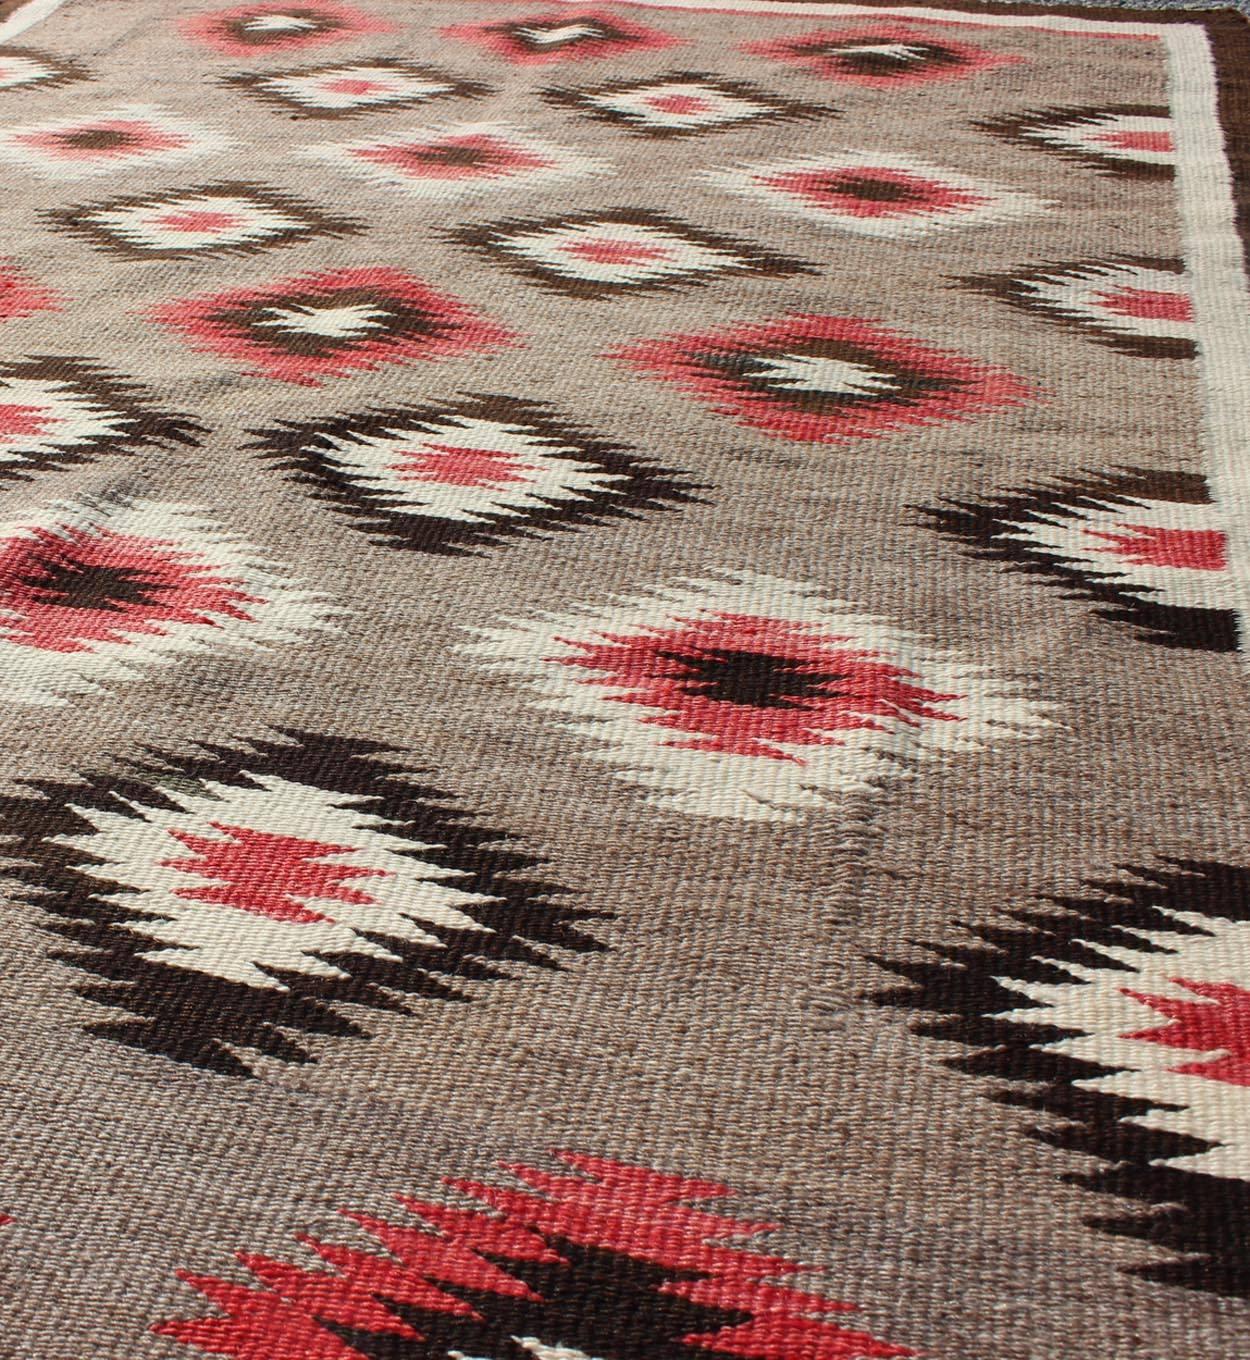 American Navajo Rug with Geometric All-Over Design in Reds and Browns In Excellent Condition For Sale In Atlanta, GA